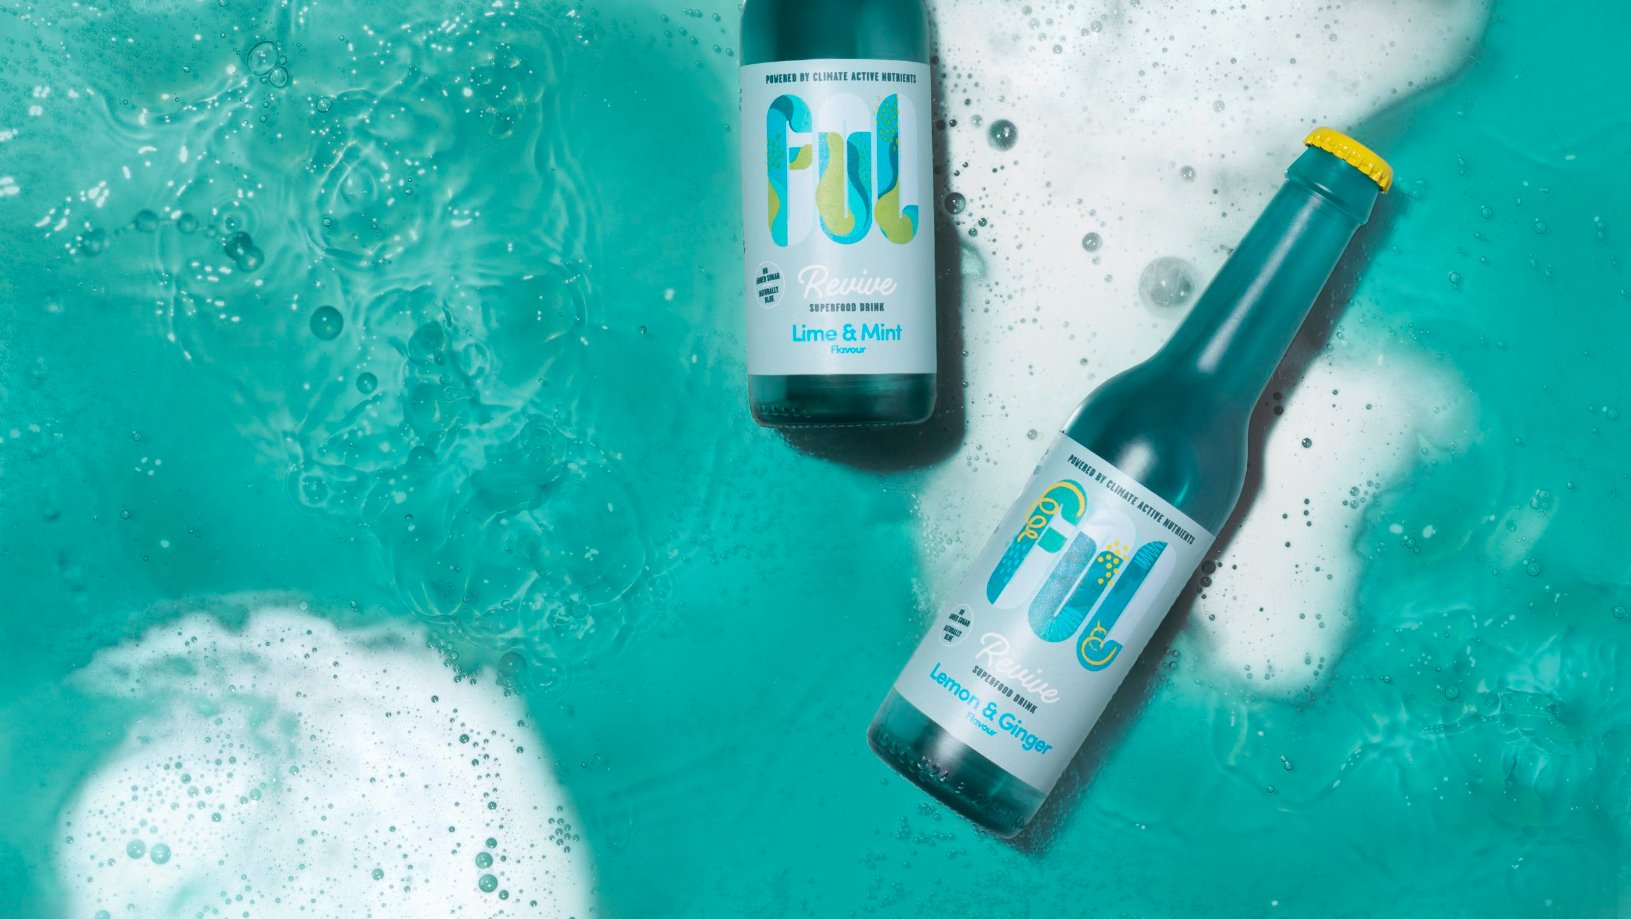 Ful Revival Is the Blue, ‘Climate-Positive’ Drink Made With Spirulina